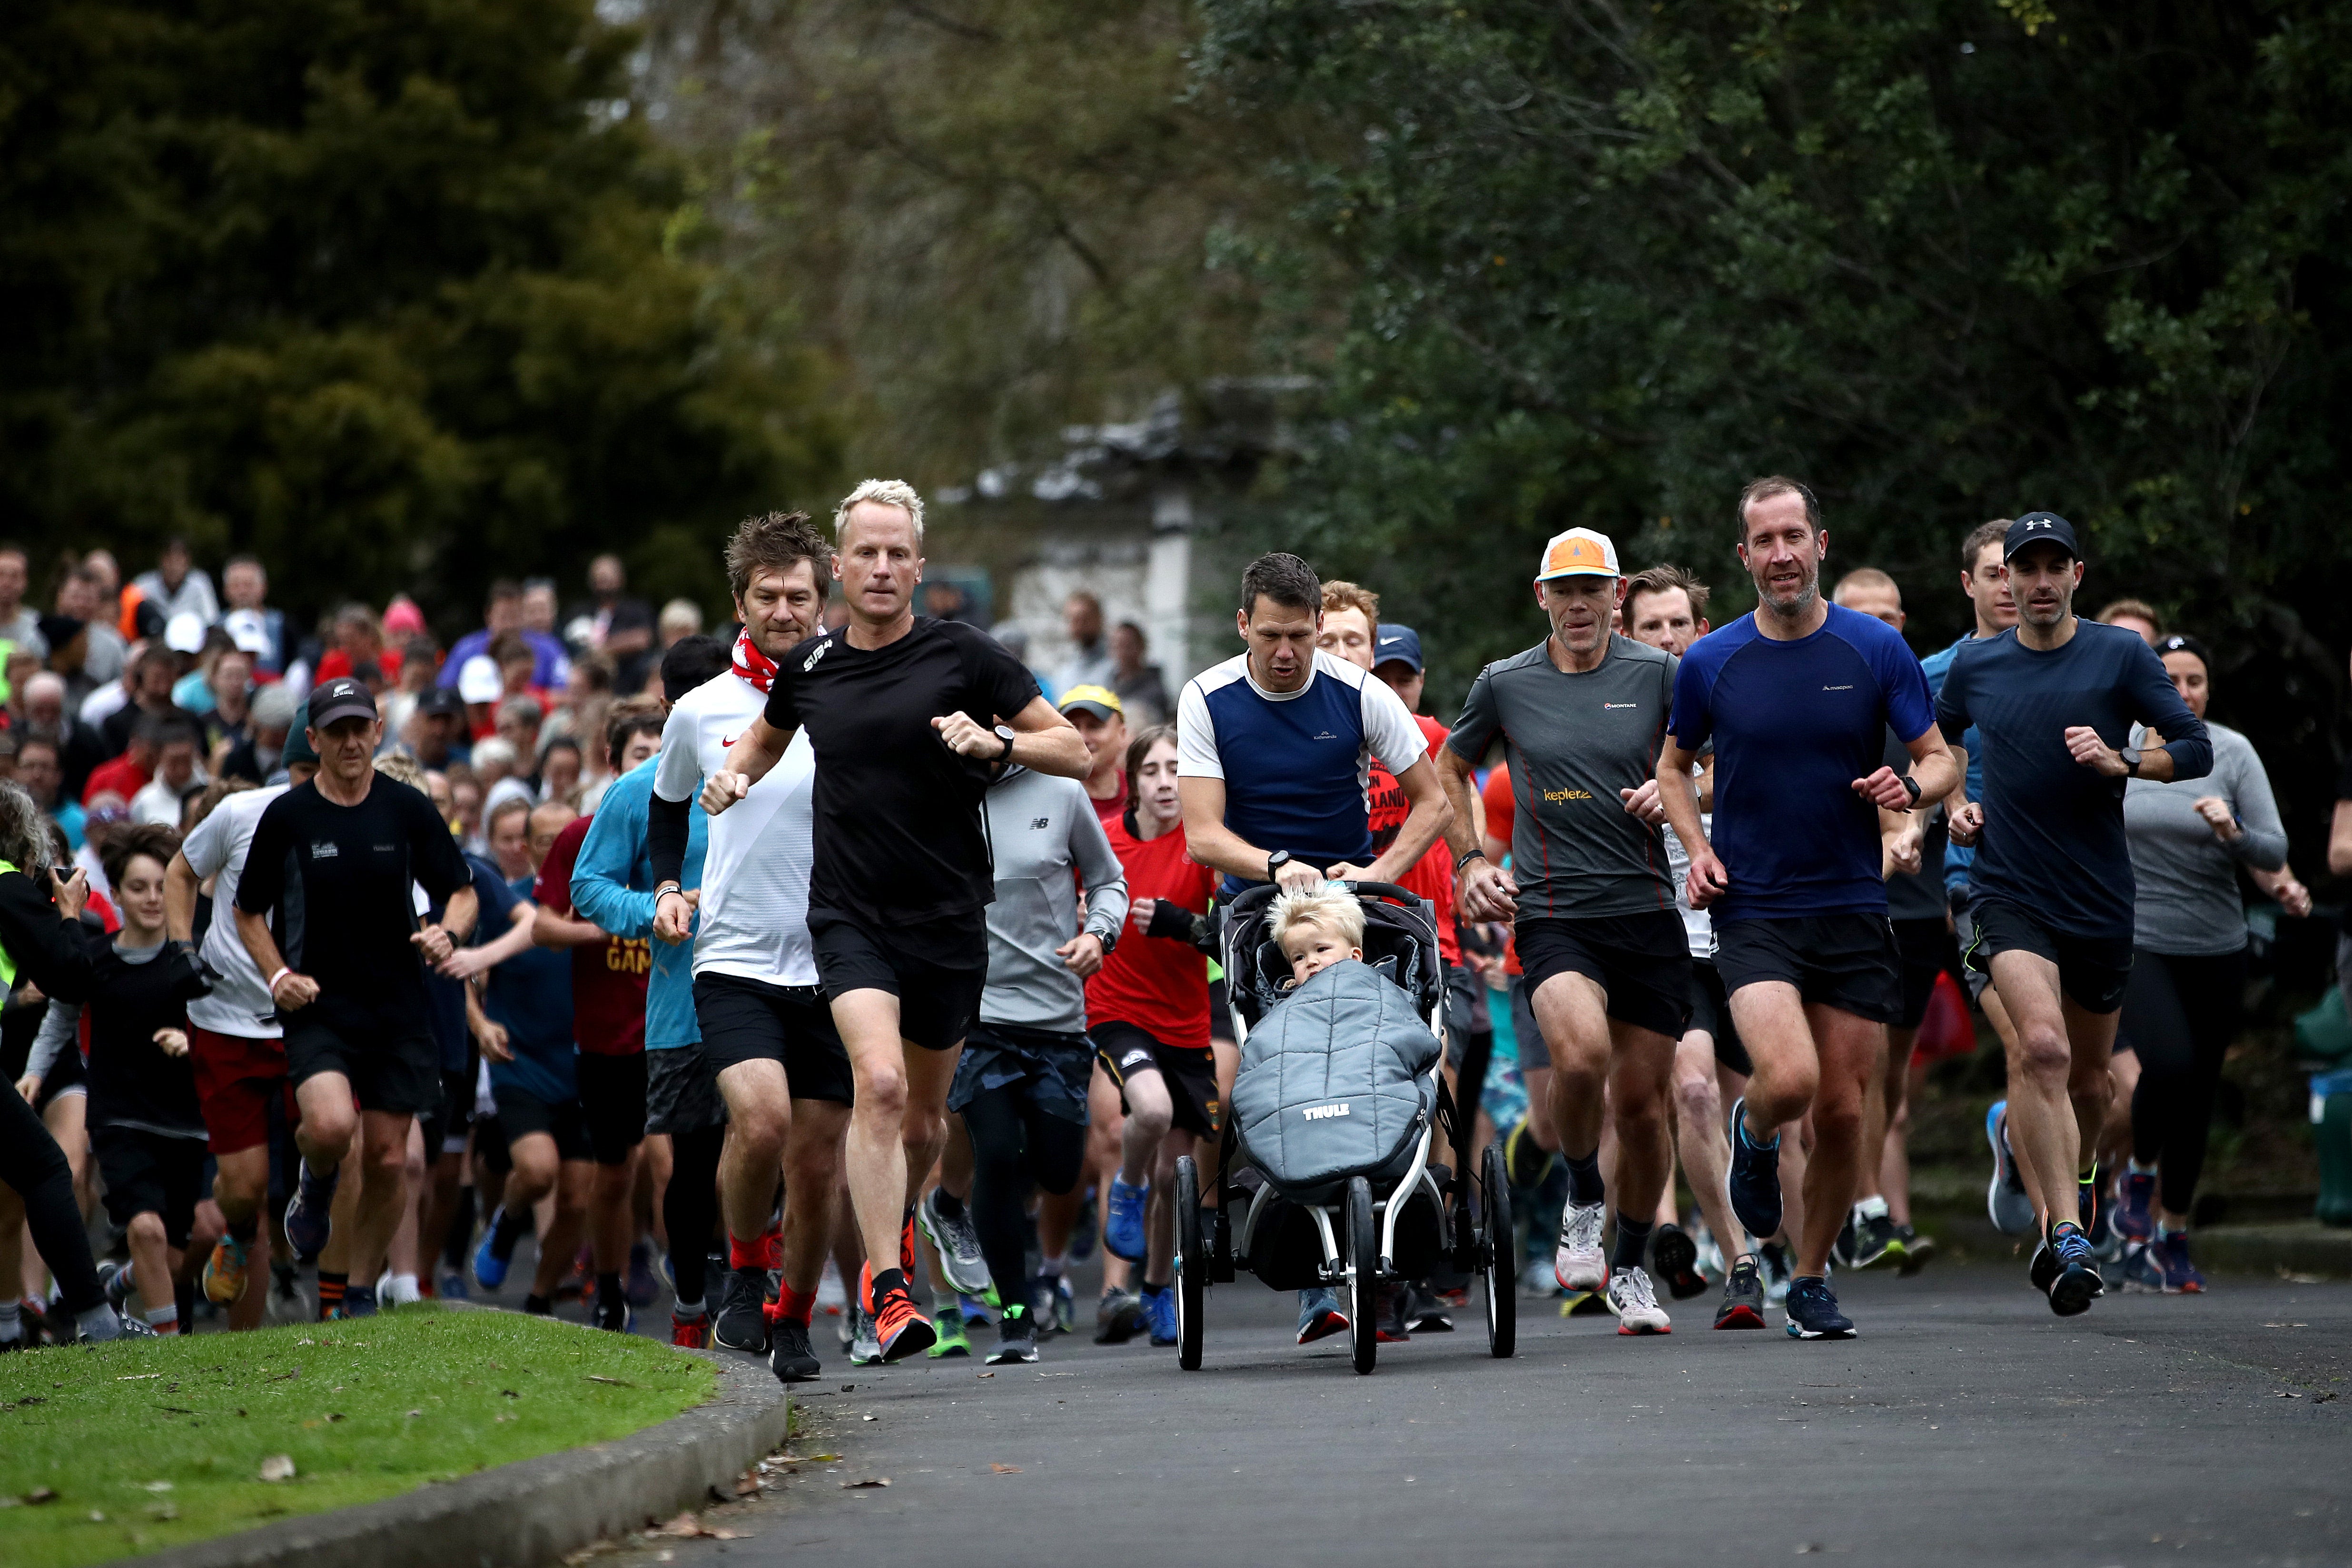 Some runners complete Parkrun each week while pushing a buggy or alongside their dog